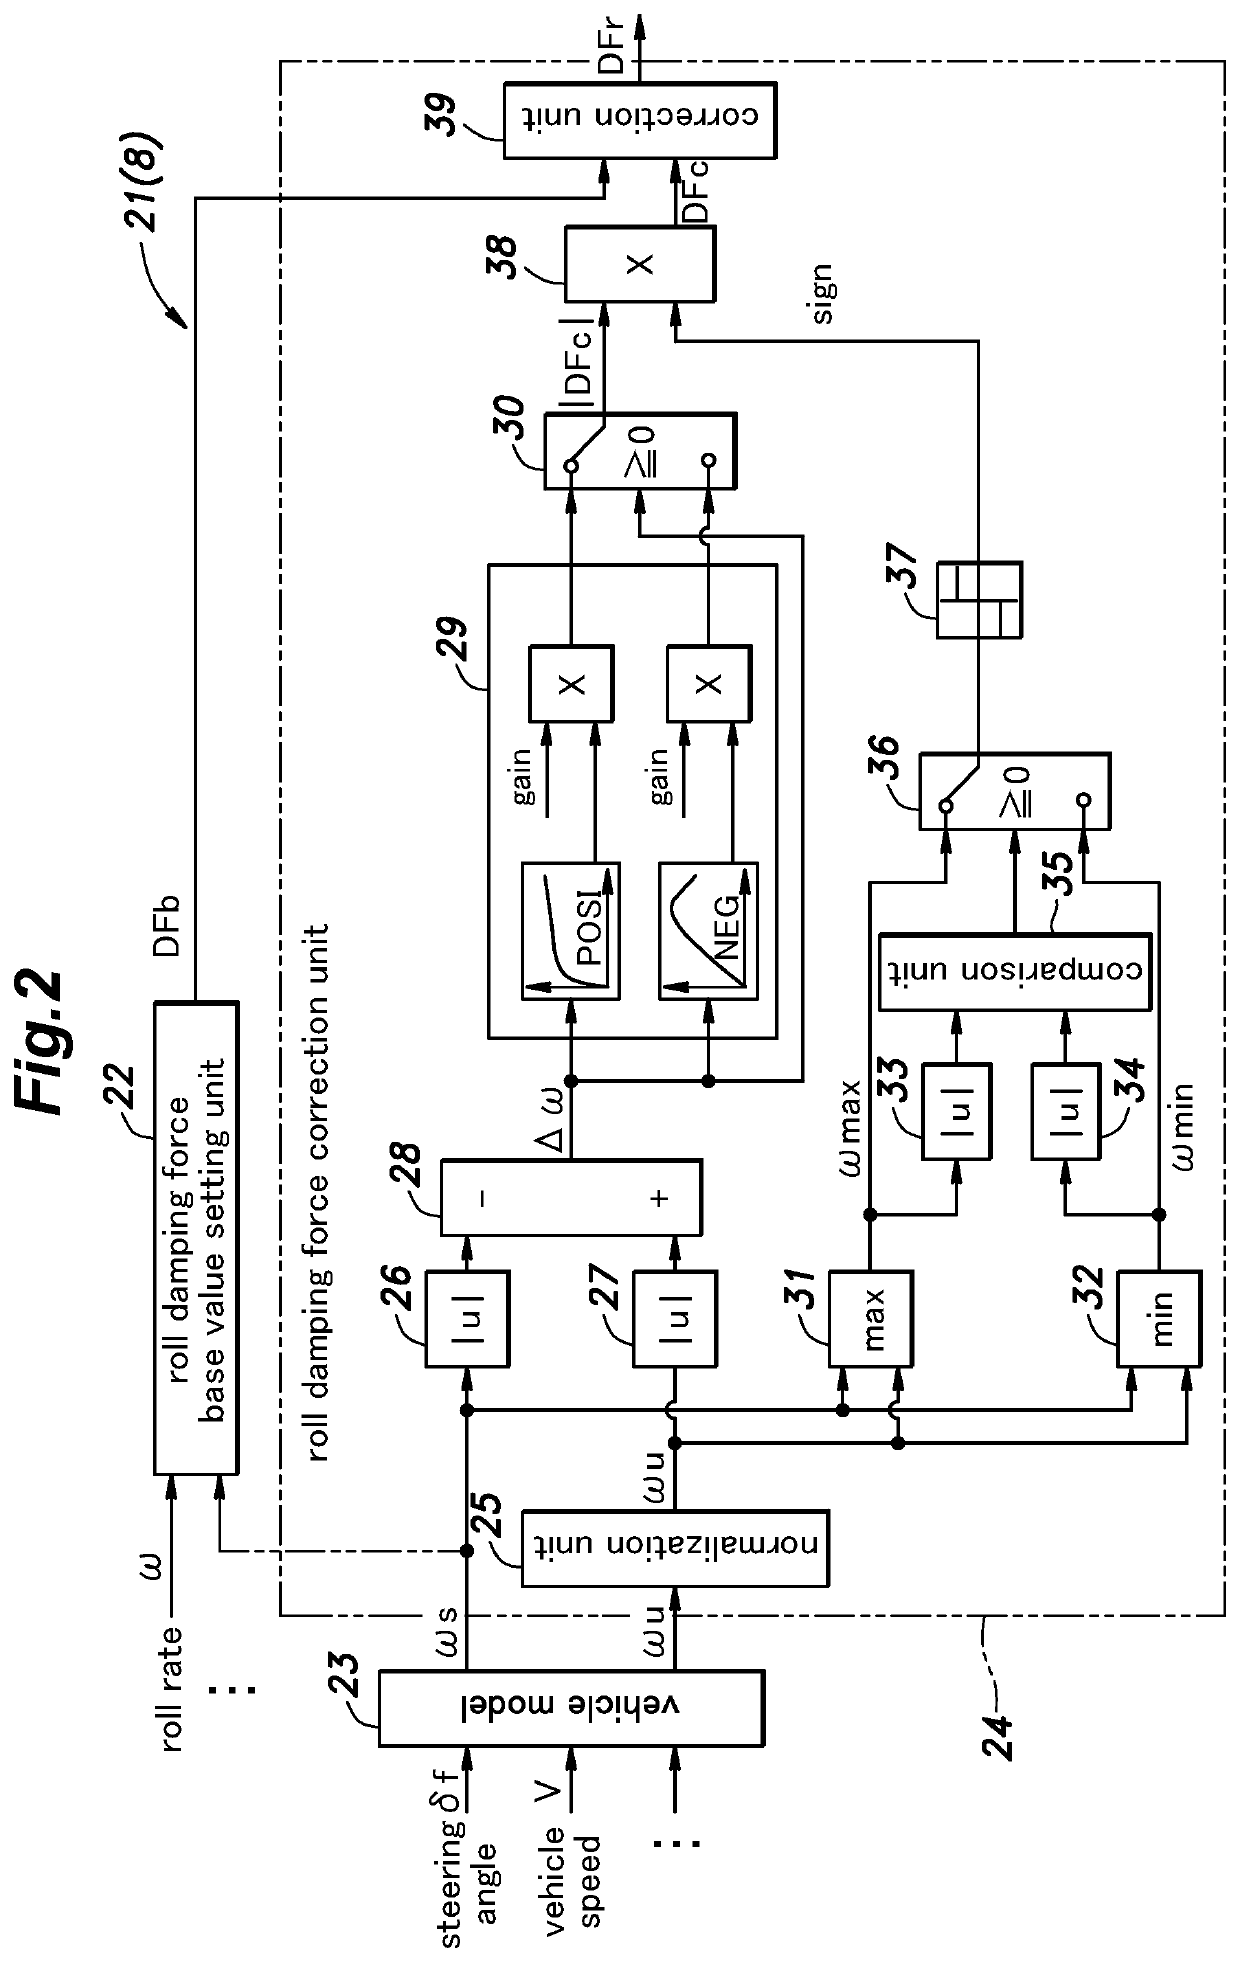 Control system for variable damping force damper